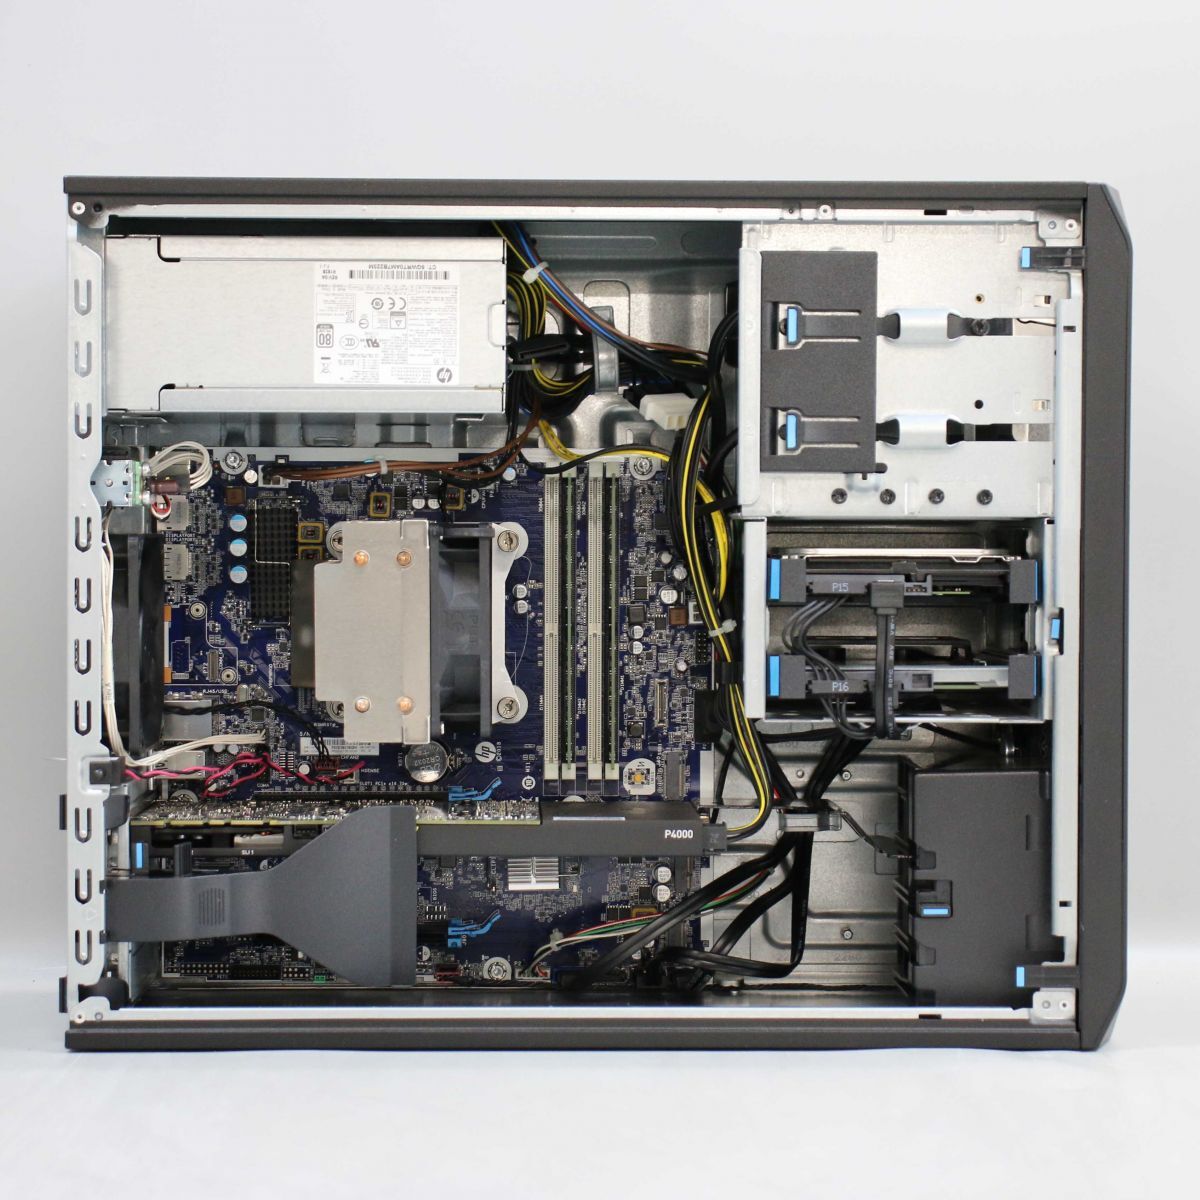 1 jpy start Quadro P4000 installing HP Z2 Tower G4 Workstation (Xeon E-2124G/ memory 32GB/SSD512GB+HDD1TB/Win 11 Pro for WS)